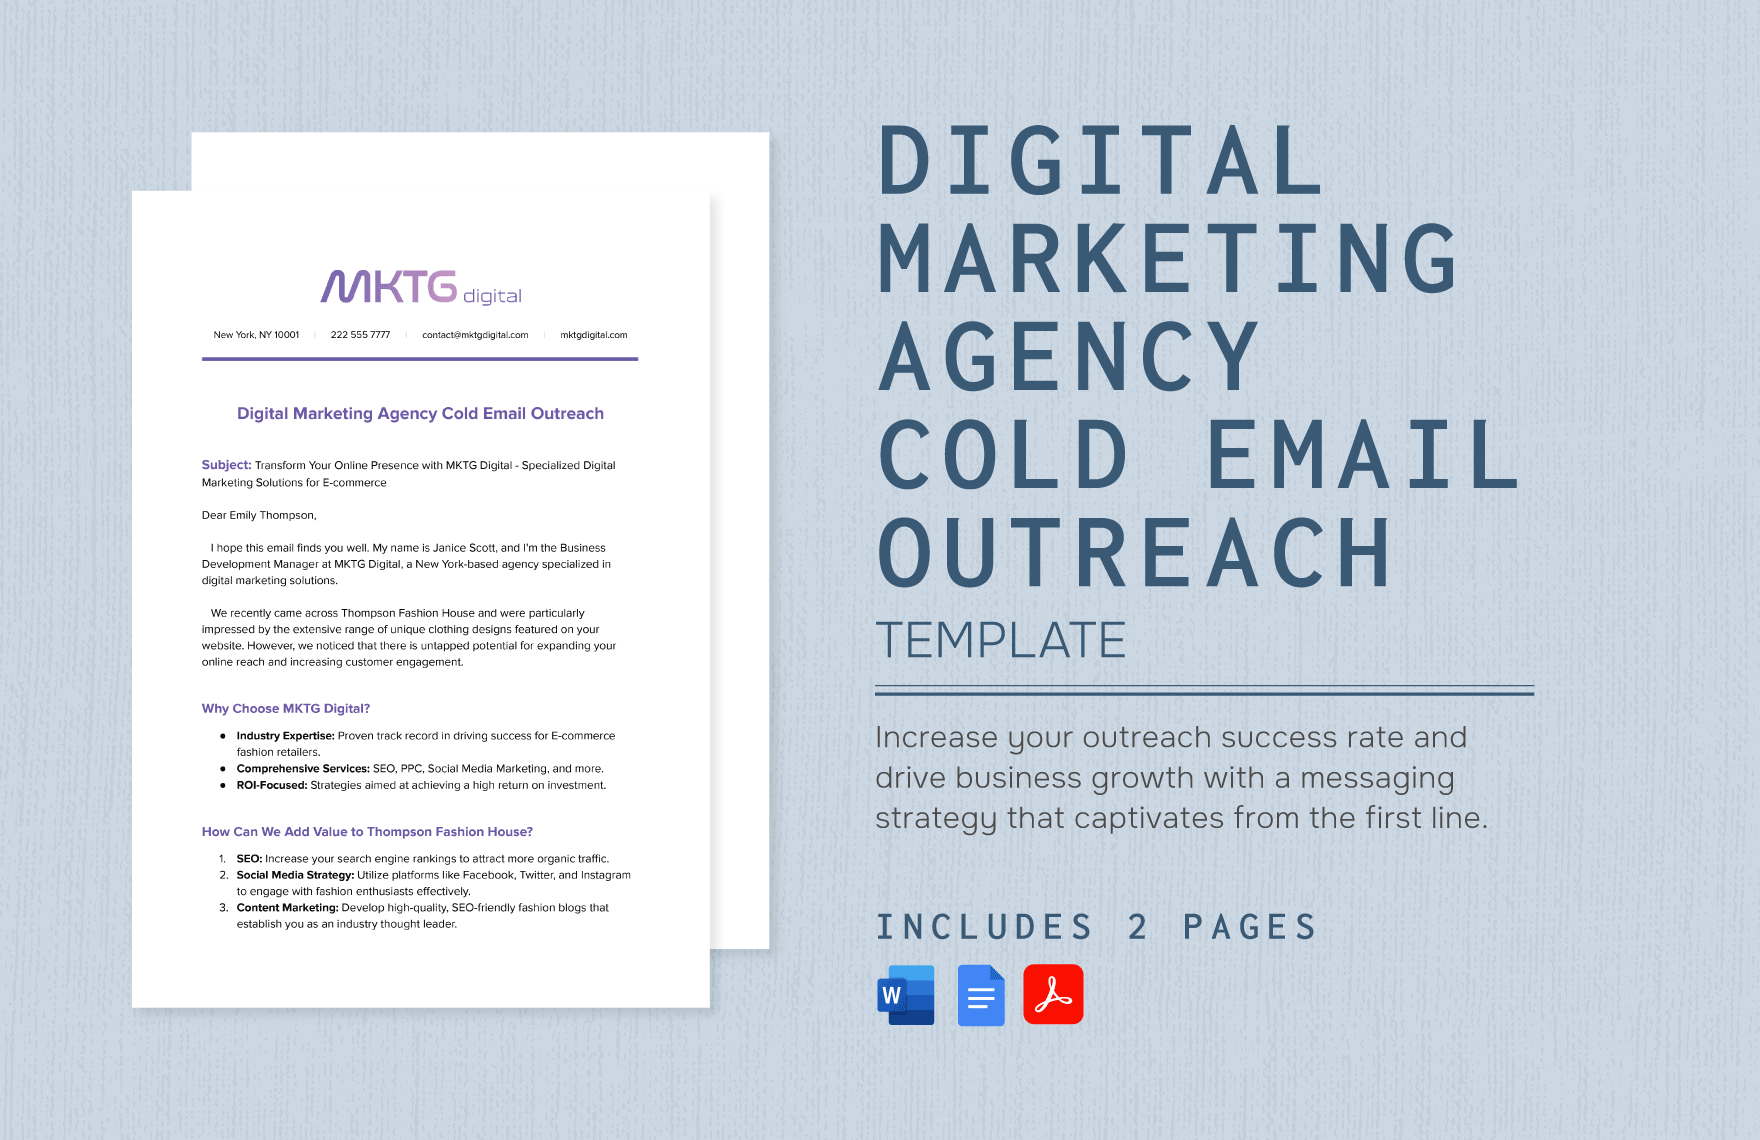 Digital Marketing Agency Cold Email Outreach Template in Word, Google Docs, PDF